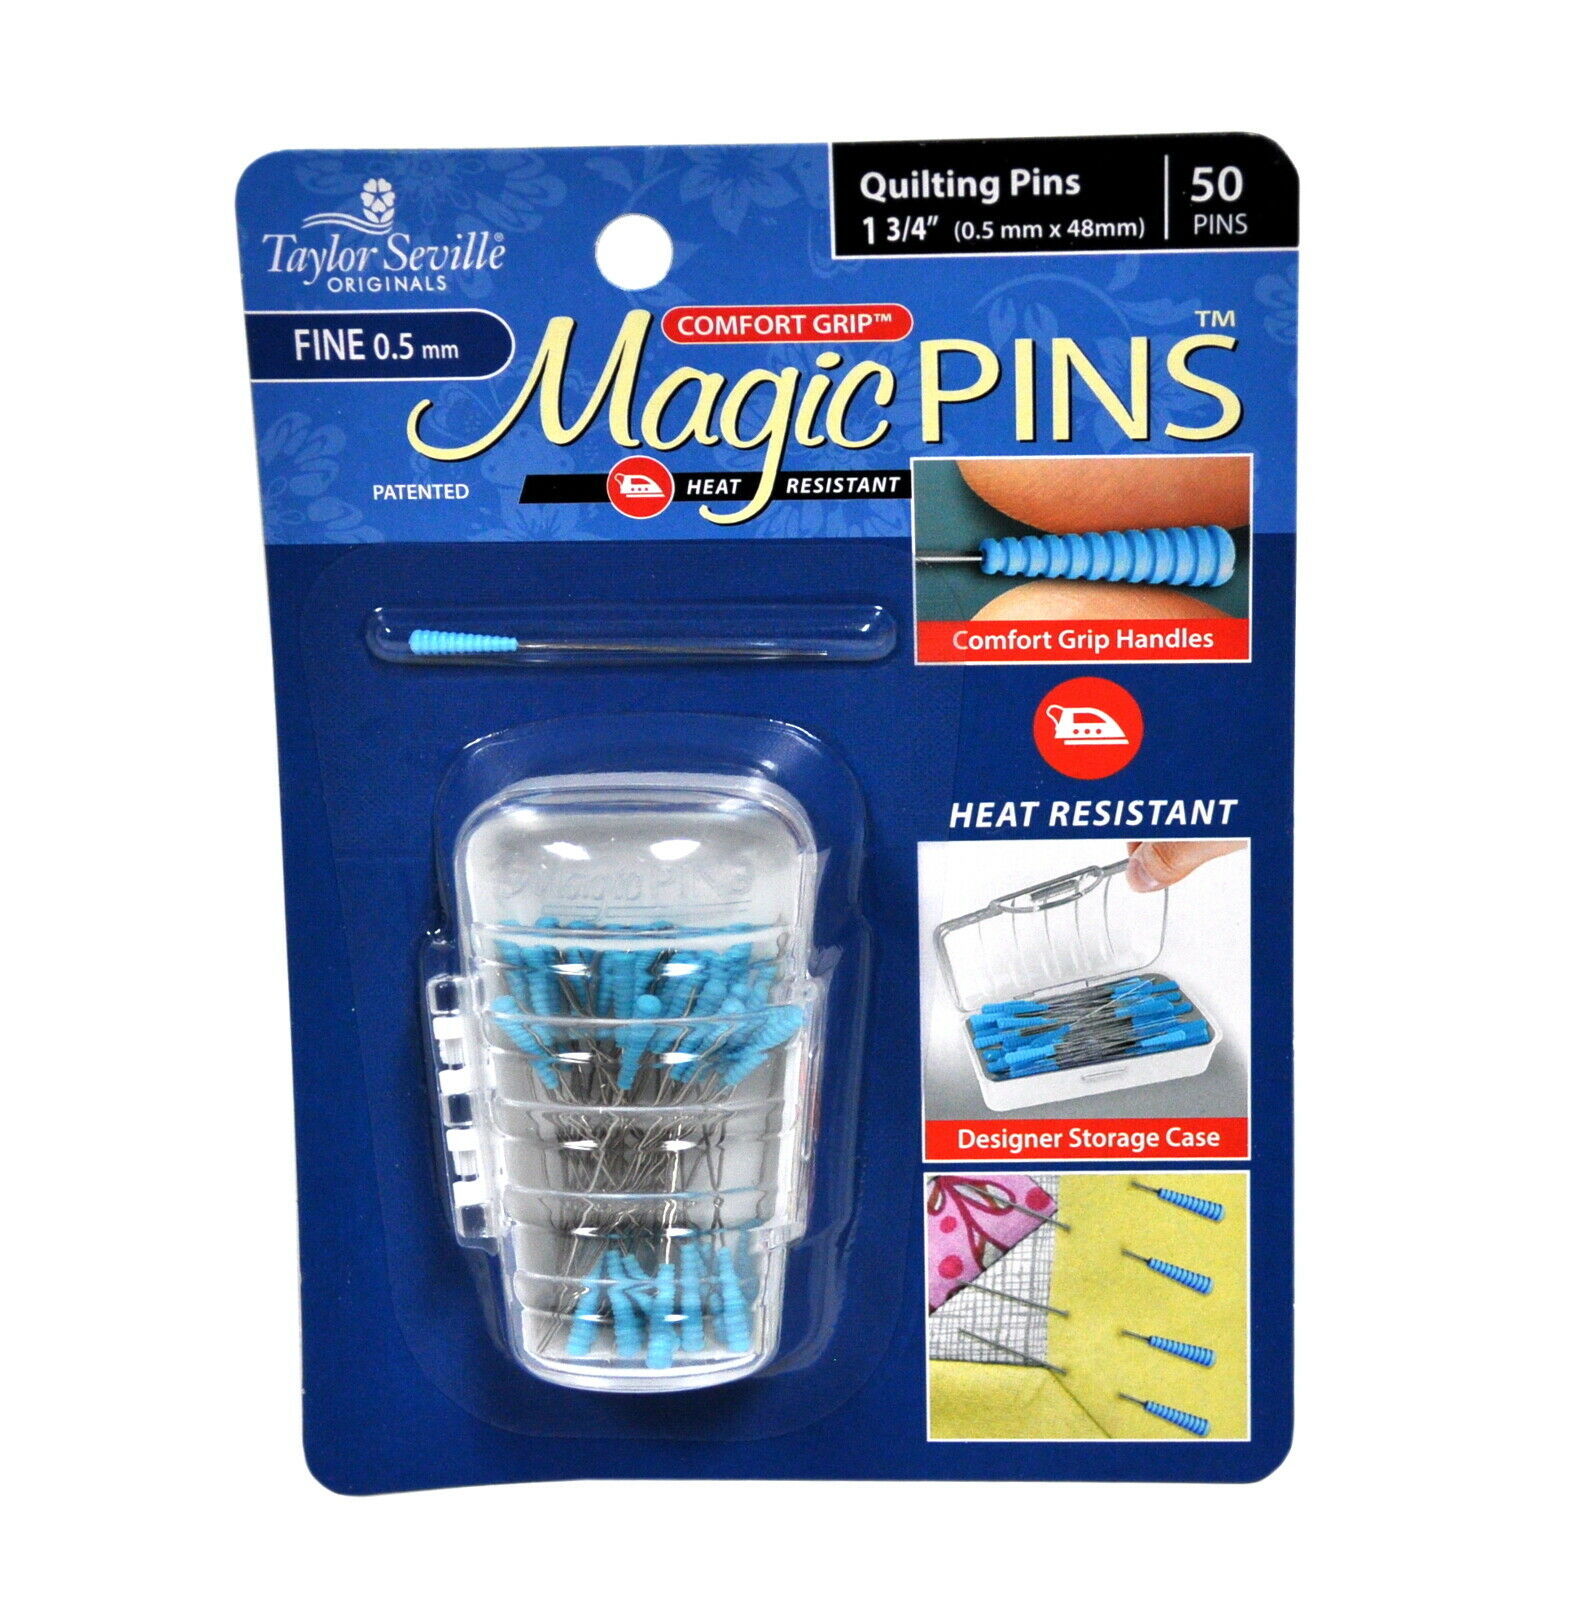 Taylor Seville Fine Quilting Pins Magic Pins 50pc